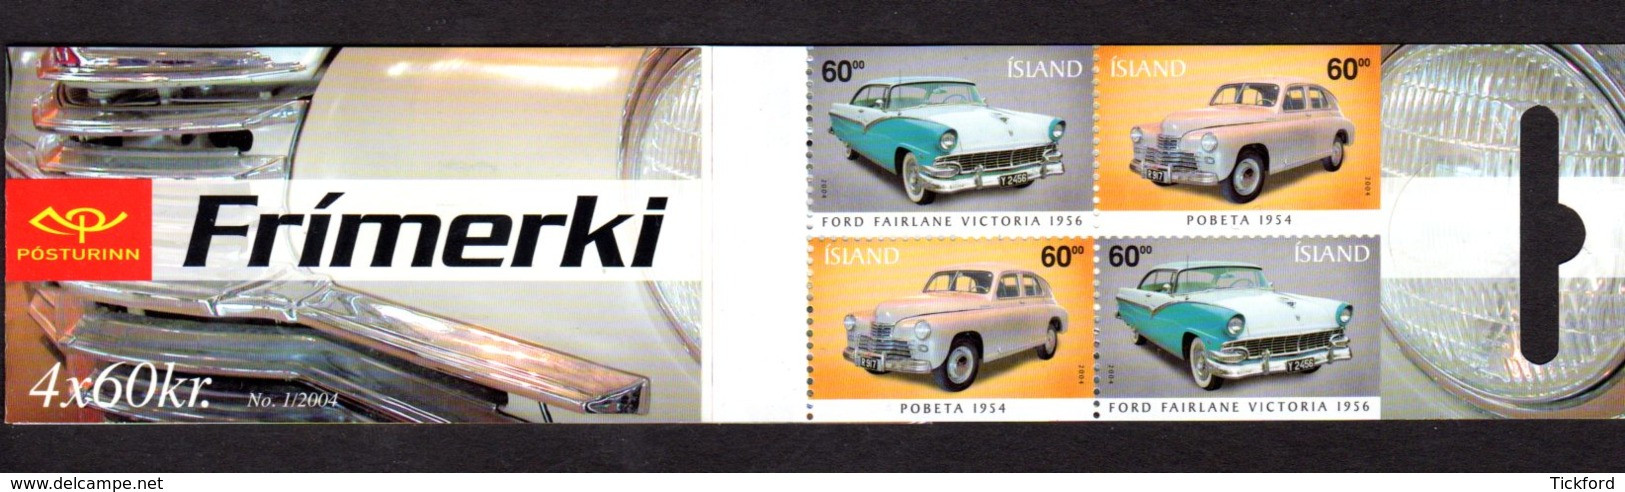 ISLANDE 2004 - Carnet Yvert C990 - Facit H71 - Booklet - NEUF** MNH - Automobiles Anciennes, Classic Cars - Booklets